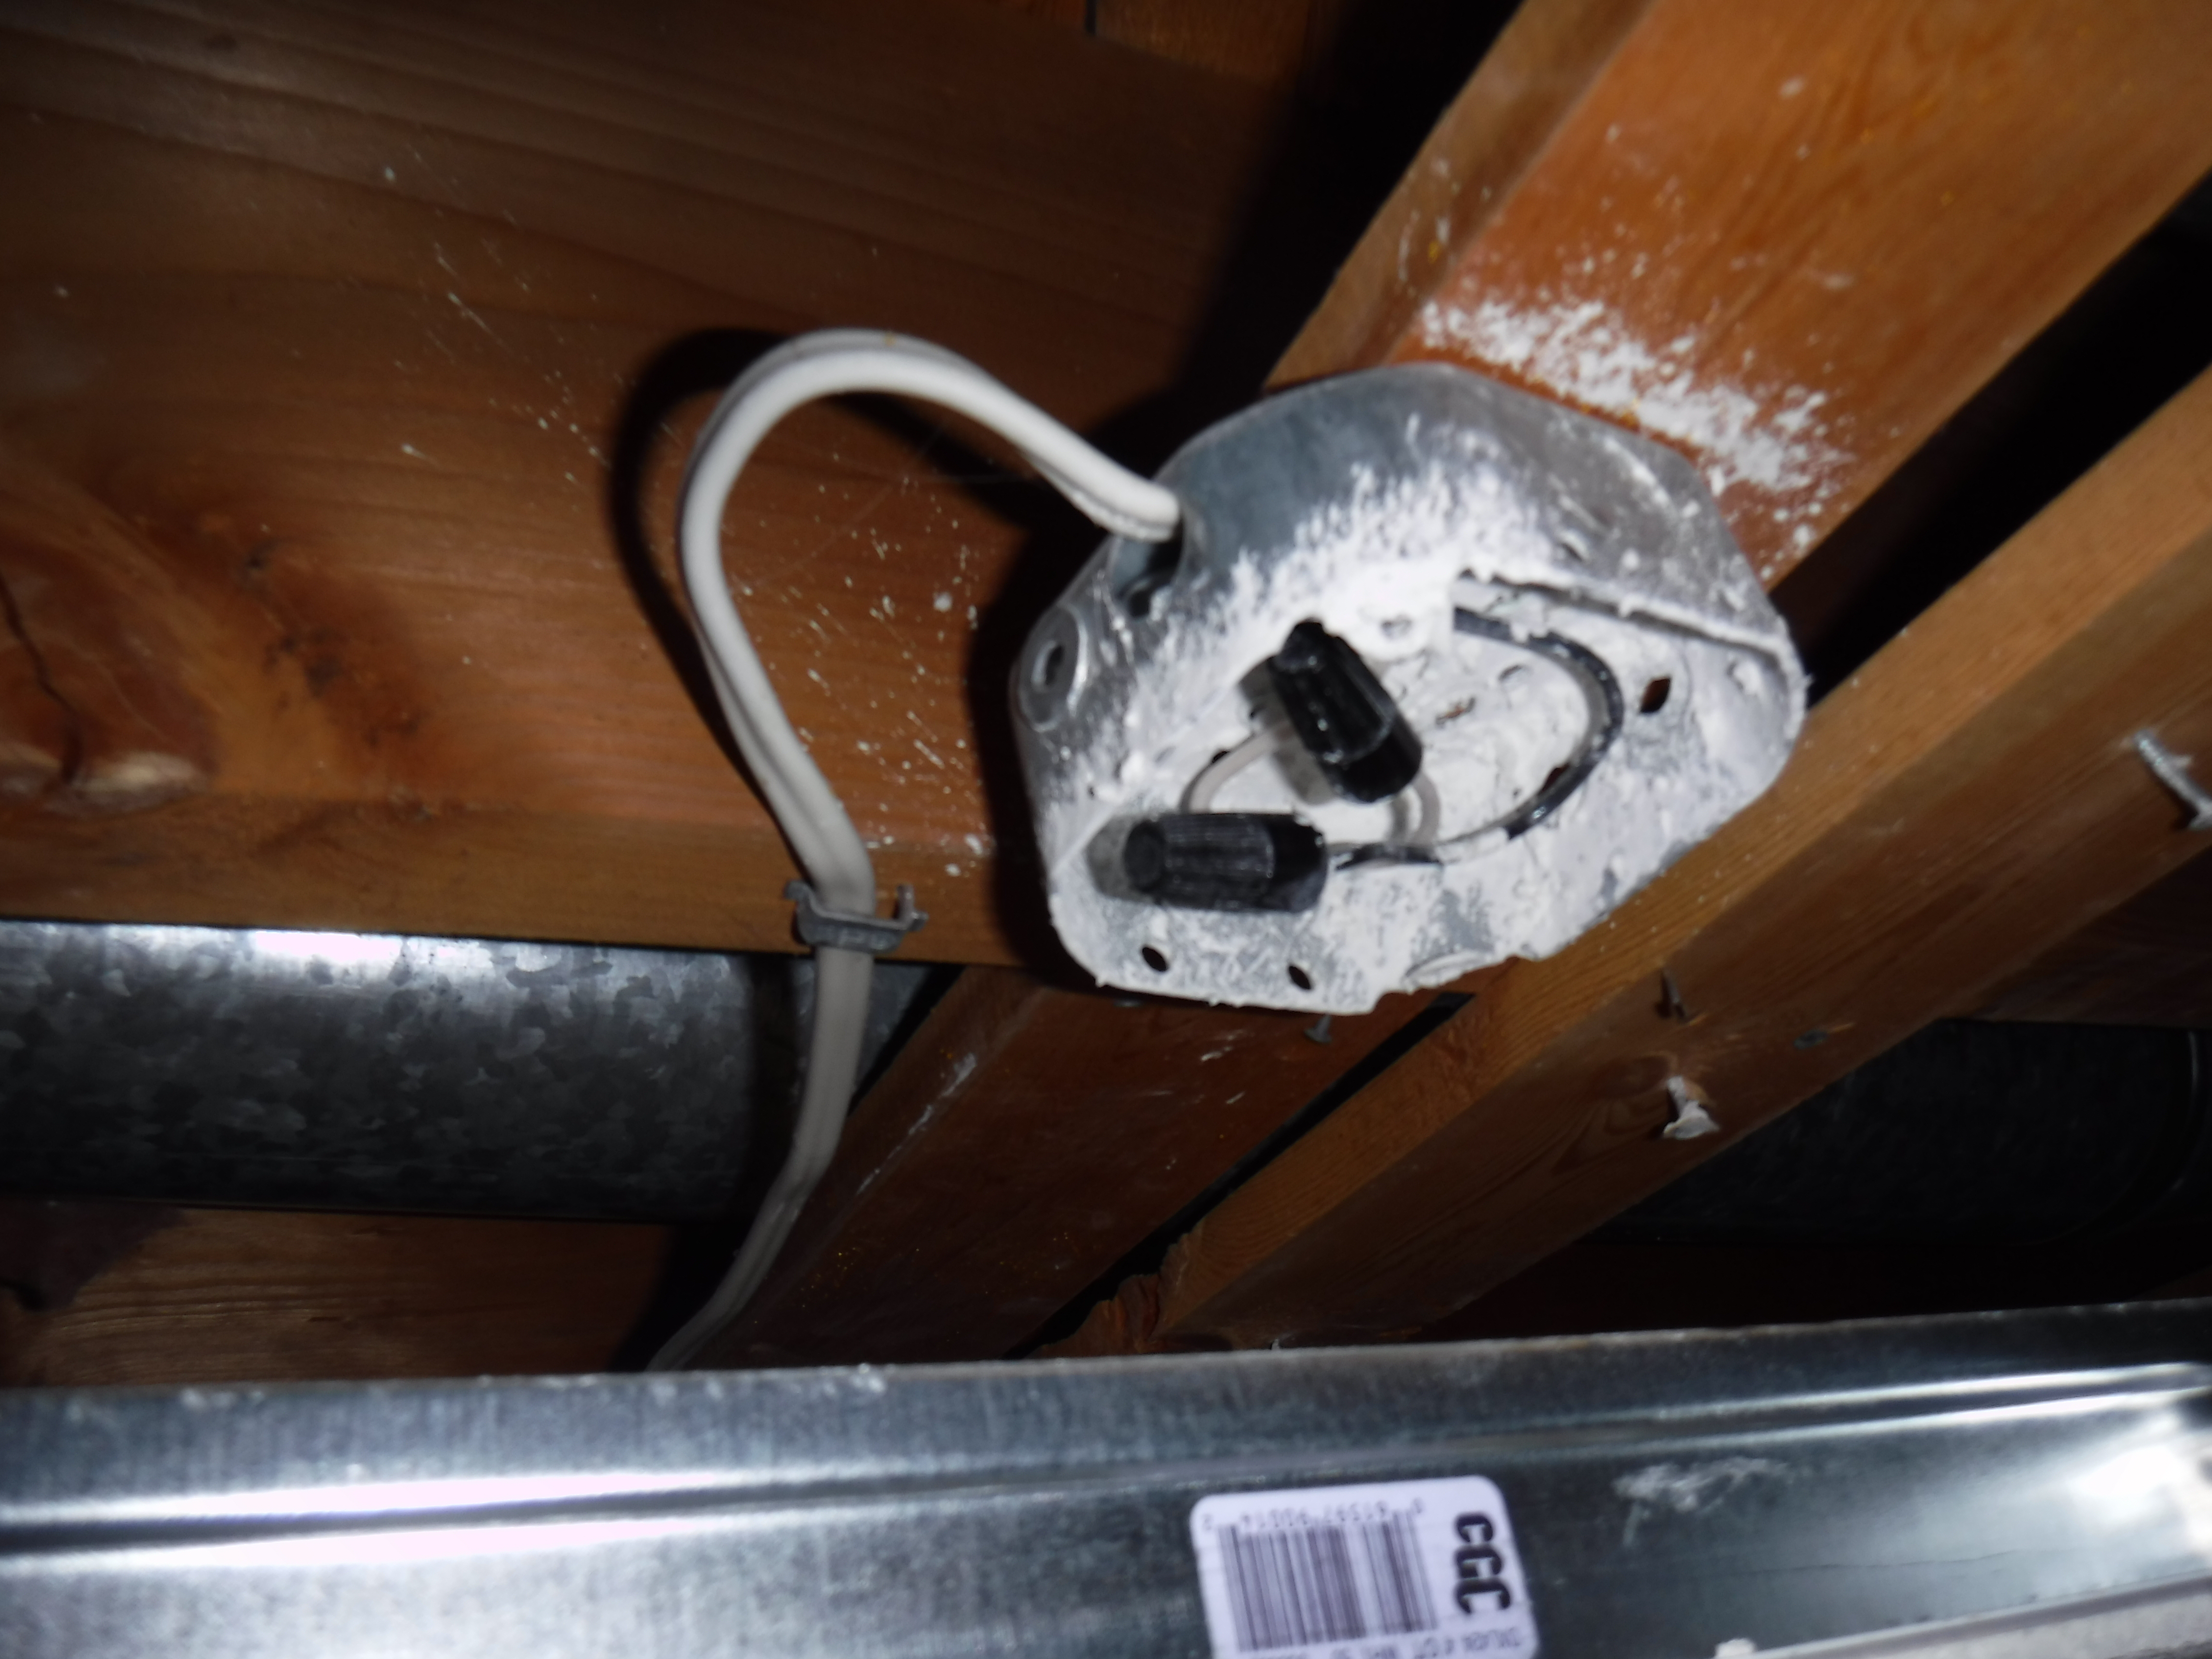 Uncovered Junction Box in Ceiling
